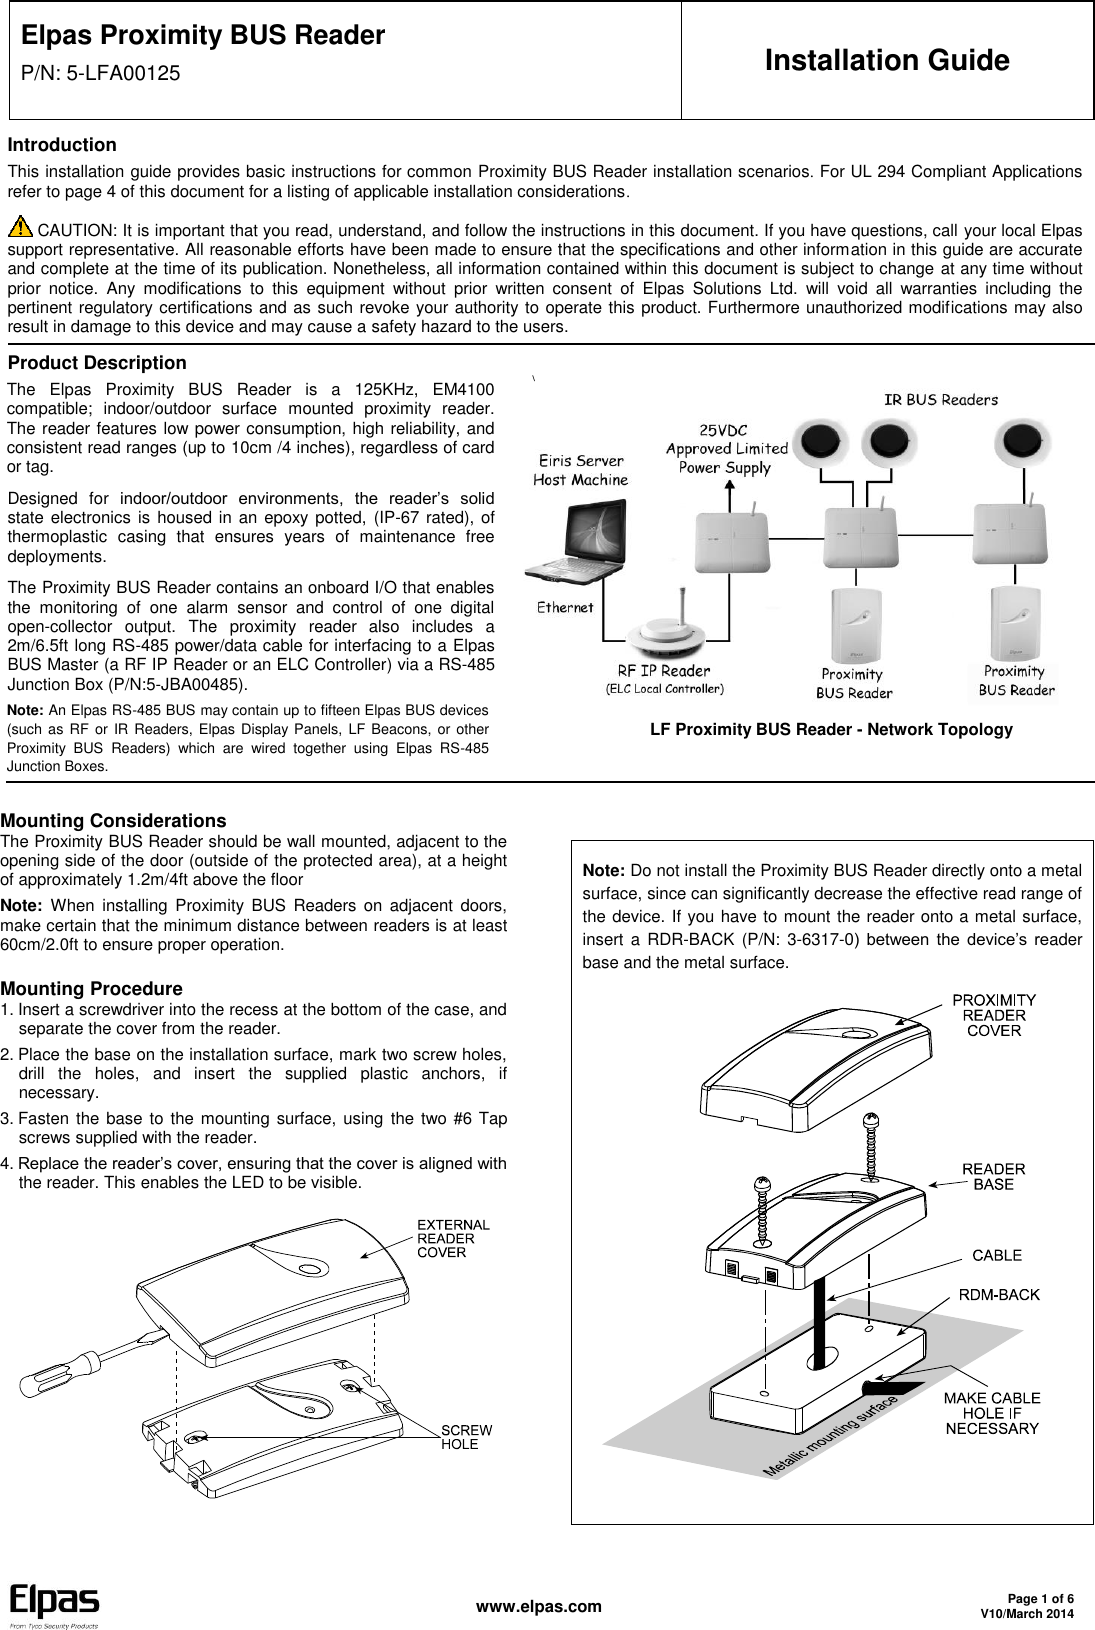   www.elpas.com Page 1 of 6 V10/March 2014  Elpas Proximity BUS Reader P/N: 5-LFA00125 Installation Guide Introduction This installation guide provides basic instructions for common Proximity BUS Reader installation scenarios. For UL 294 Compliant Applications refer to page 4 of this document for a listing of applicable installation considerations.  CAUTION: It is important that you read, understand, and follow the instructions in this document. If you have questions, call your local Elpas support representative. All reasonable efforts have been made to ensure that the specifications and other information in this guide are accurate and complete at the time of its publication. Nonetheless, all information contained within this document is subject to change at any time without prior  notice.  Any  modifications  to  this  equipment  without  prior  written  consent  of  Elpas  Solutions  Ltd.  will  void  all  warranties  including  the pertinent regulatory certifications and as such revoke your authority to operate this product. Furthermore unauthorized modifications may also result in damage to this device and may cause a safety hazard to the users. Product Description The  Elpas  Proximity  BUS  Reader  is  a  125KHz,  EM4100 compatible;  indoor/outdoor  surface  mounted  proximity  reader. The reader features low power consumption, high reliability, and consistent read ranges (up to 10cm /4 inches), regardless of card or tag. Designed  for  indoor/outdoor  environments,  the  reader’s  solid state electronics  is housed in an  epoxy potted, (IP-67 rated), of thermoplastic  casing  that  ensures  years  of  maintenance  free deployments. The Proximity BUS Reader contains an onboard I/O that enables the  monitoring  of  one  alarm  sensor  and  control  of  one  digital open-collector  output.  The  proximity  reader  also  includes  a 2m/6.5ft long RS-485 power/data cable for interfacing to a Elpas BUS Master (a RF IP Reader or an ELC Controller) via a RS-485 Junction Box (P/N:5-JBA00485). Note: An Elpas RS-485 BUS may contain up to fifteen Elpas BUS devices (such as RF or IR Readers, Elpas Display Panels, LF Beacons, or other Proximity  BUS  Readers)  which  are  wired  together  using  Elpas  RS-485 Junction Boxes. \            LF Proximity BUS Reader - Network Topology   Mounting Considerations The Proximity BUS Reader should be wall mounted, adjacent to the opening side of the door (outside of the protected area), at a height of approximately 1.2m/4ft above the floor Note:  When  installing  Proximity  BUS  Readers  on  adjacent  doors, make certain that the minimum distance between readers is at least 60cm/2.0ft to ensure proper operation. Mounting Procedure 1. Insert a screwdriver into the recess at the bottom of the case, and separate the cover from the reader. 2. Place the base on the installation surface, mark two screw holes, drill  the  holes,  and  insert  the  supplied  plastic  anchors,  if necessary. 3. Fasten the  base to the mounting surface, using  the two #6 Tap screws supplied with the reader. 4. Replace the reader’s cover, ensuring that the cover is aligned with the reader. This enables the LED to be visible.        Note: Do not install the Proximity BUS Reader directly onto a metal surface, since can significantly decrease the effective read range of the device. If you have to mount the reader onto a metal surface, insert  a  RDR-BACK  (P/N:  3-6317-0)  between  the  device’s  reader base and the metal surface.         